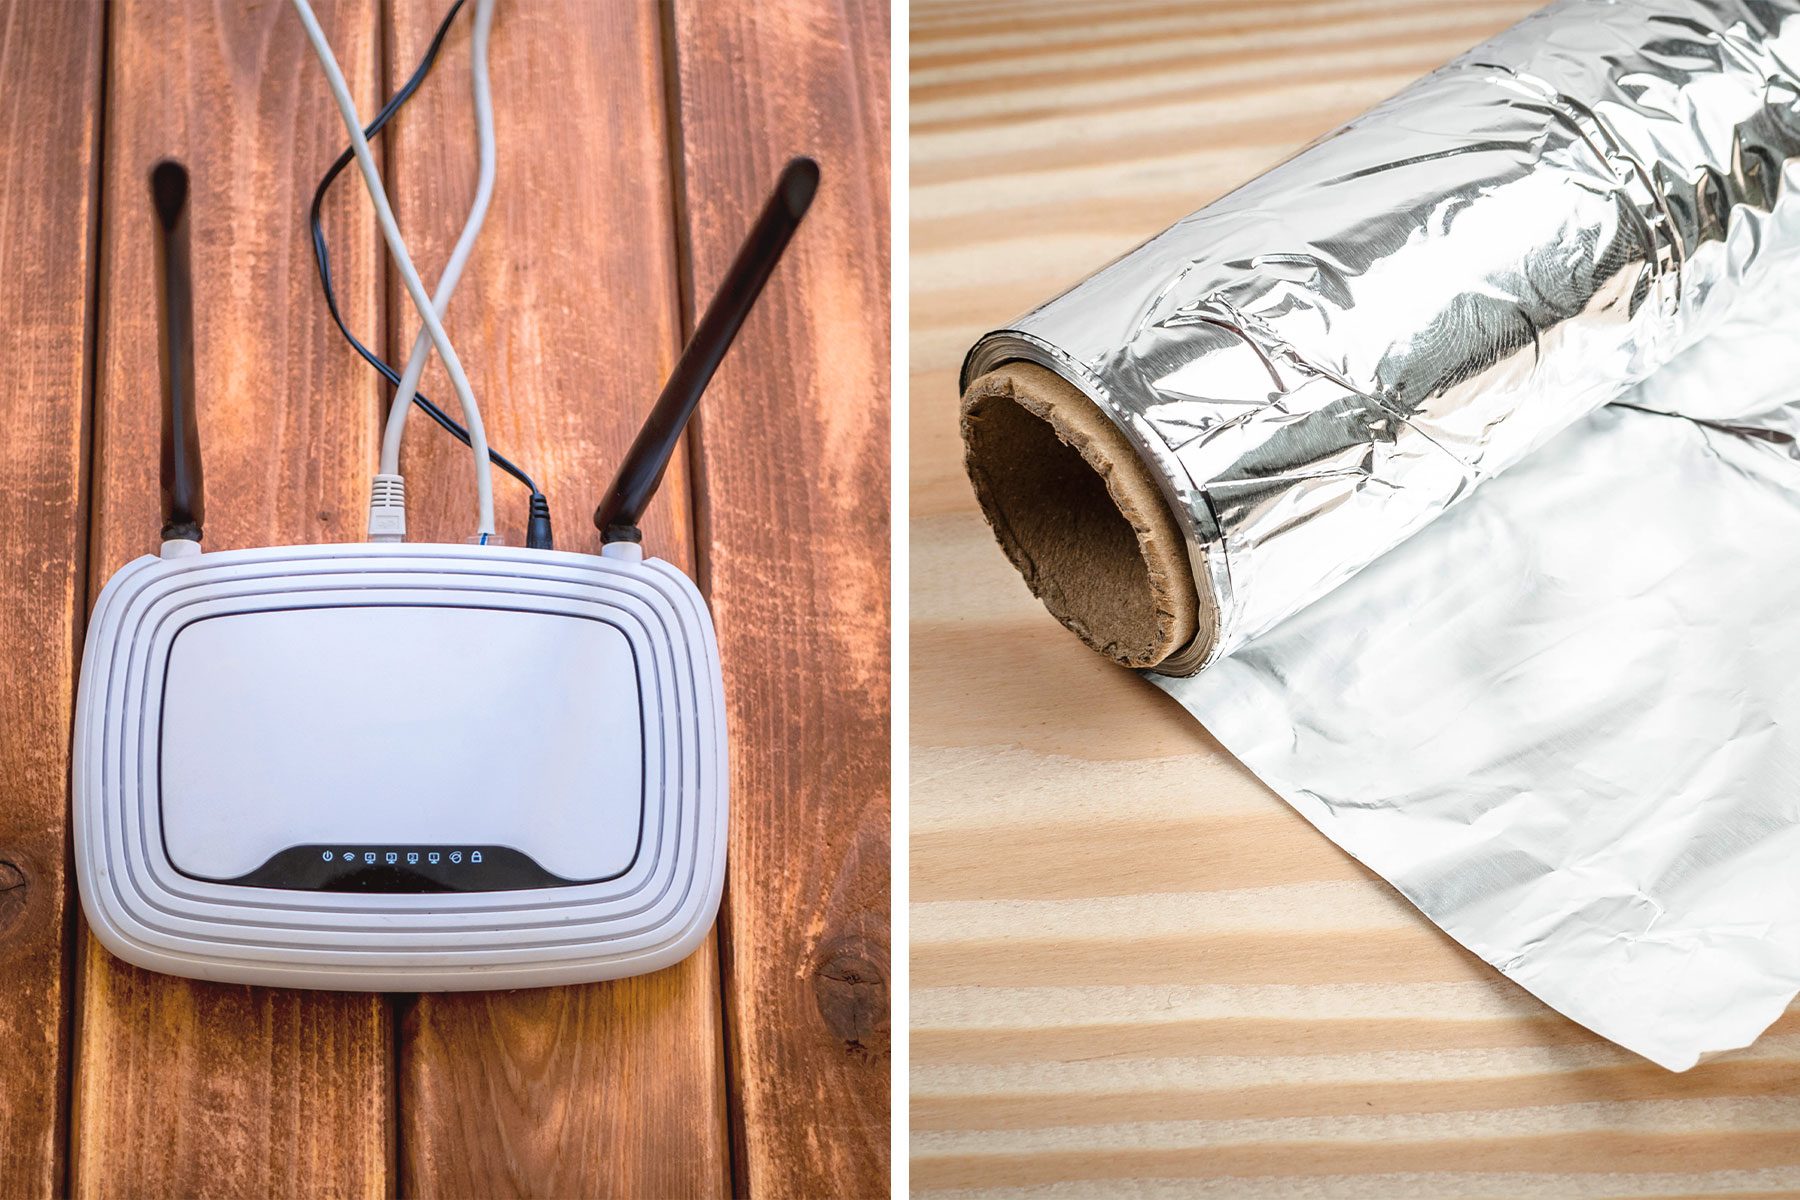 How Aluminum Foil Can Boost Your Wi-Fi Signal